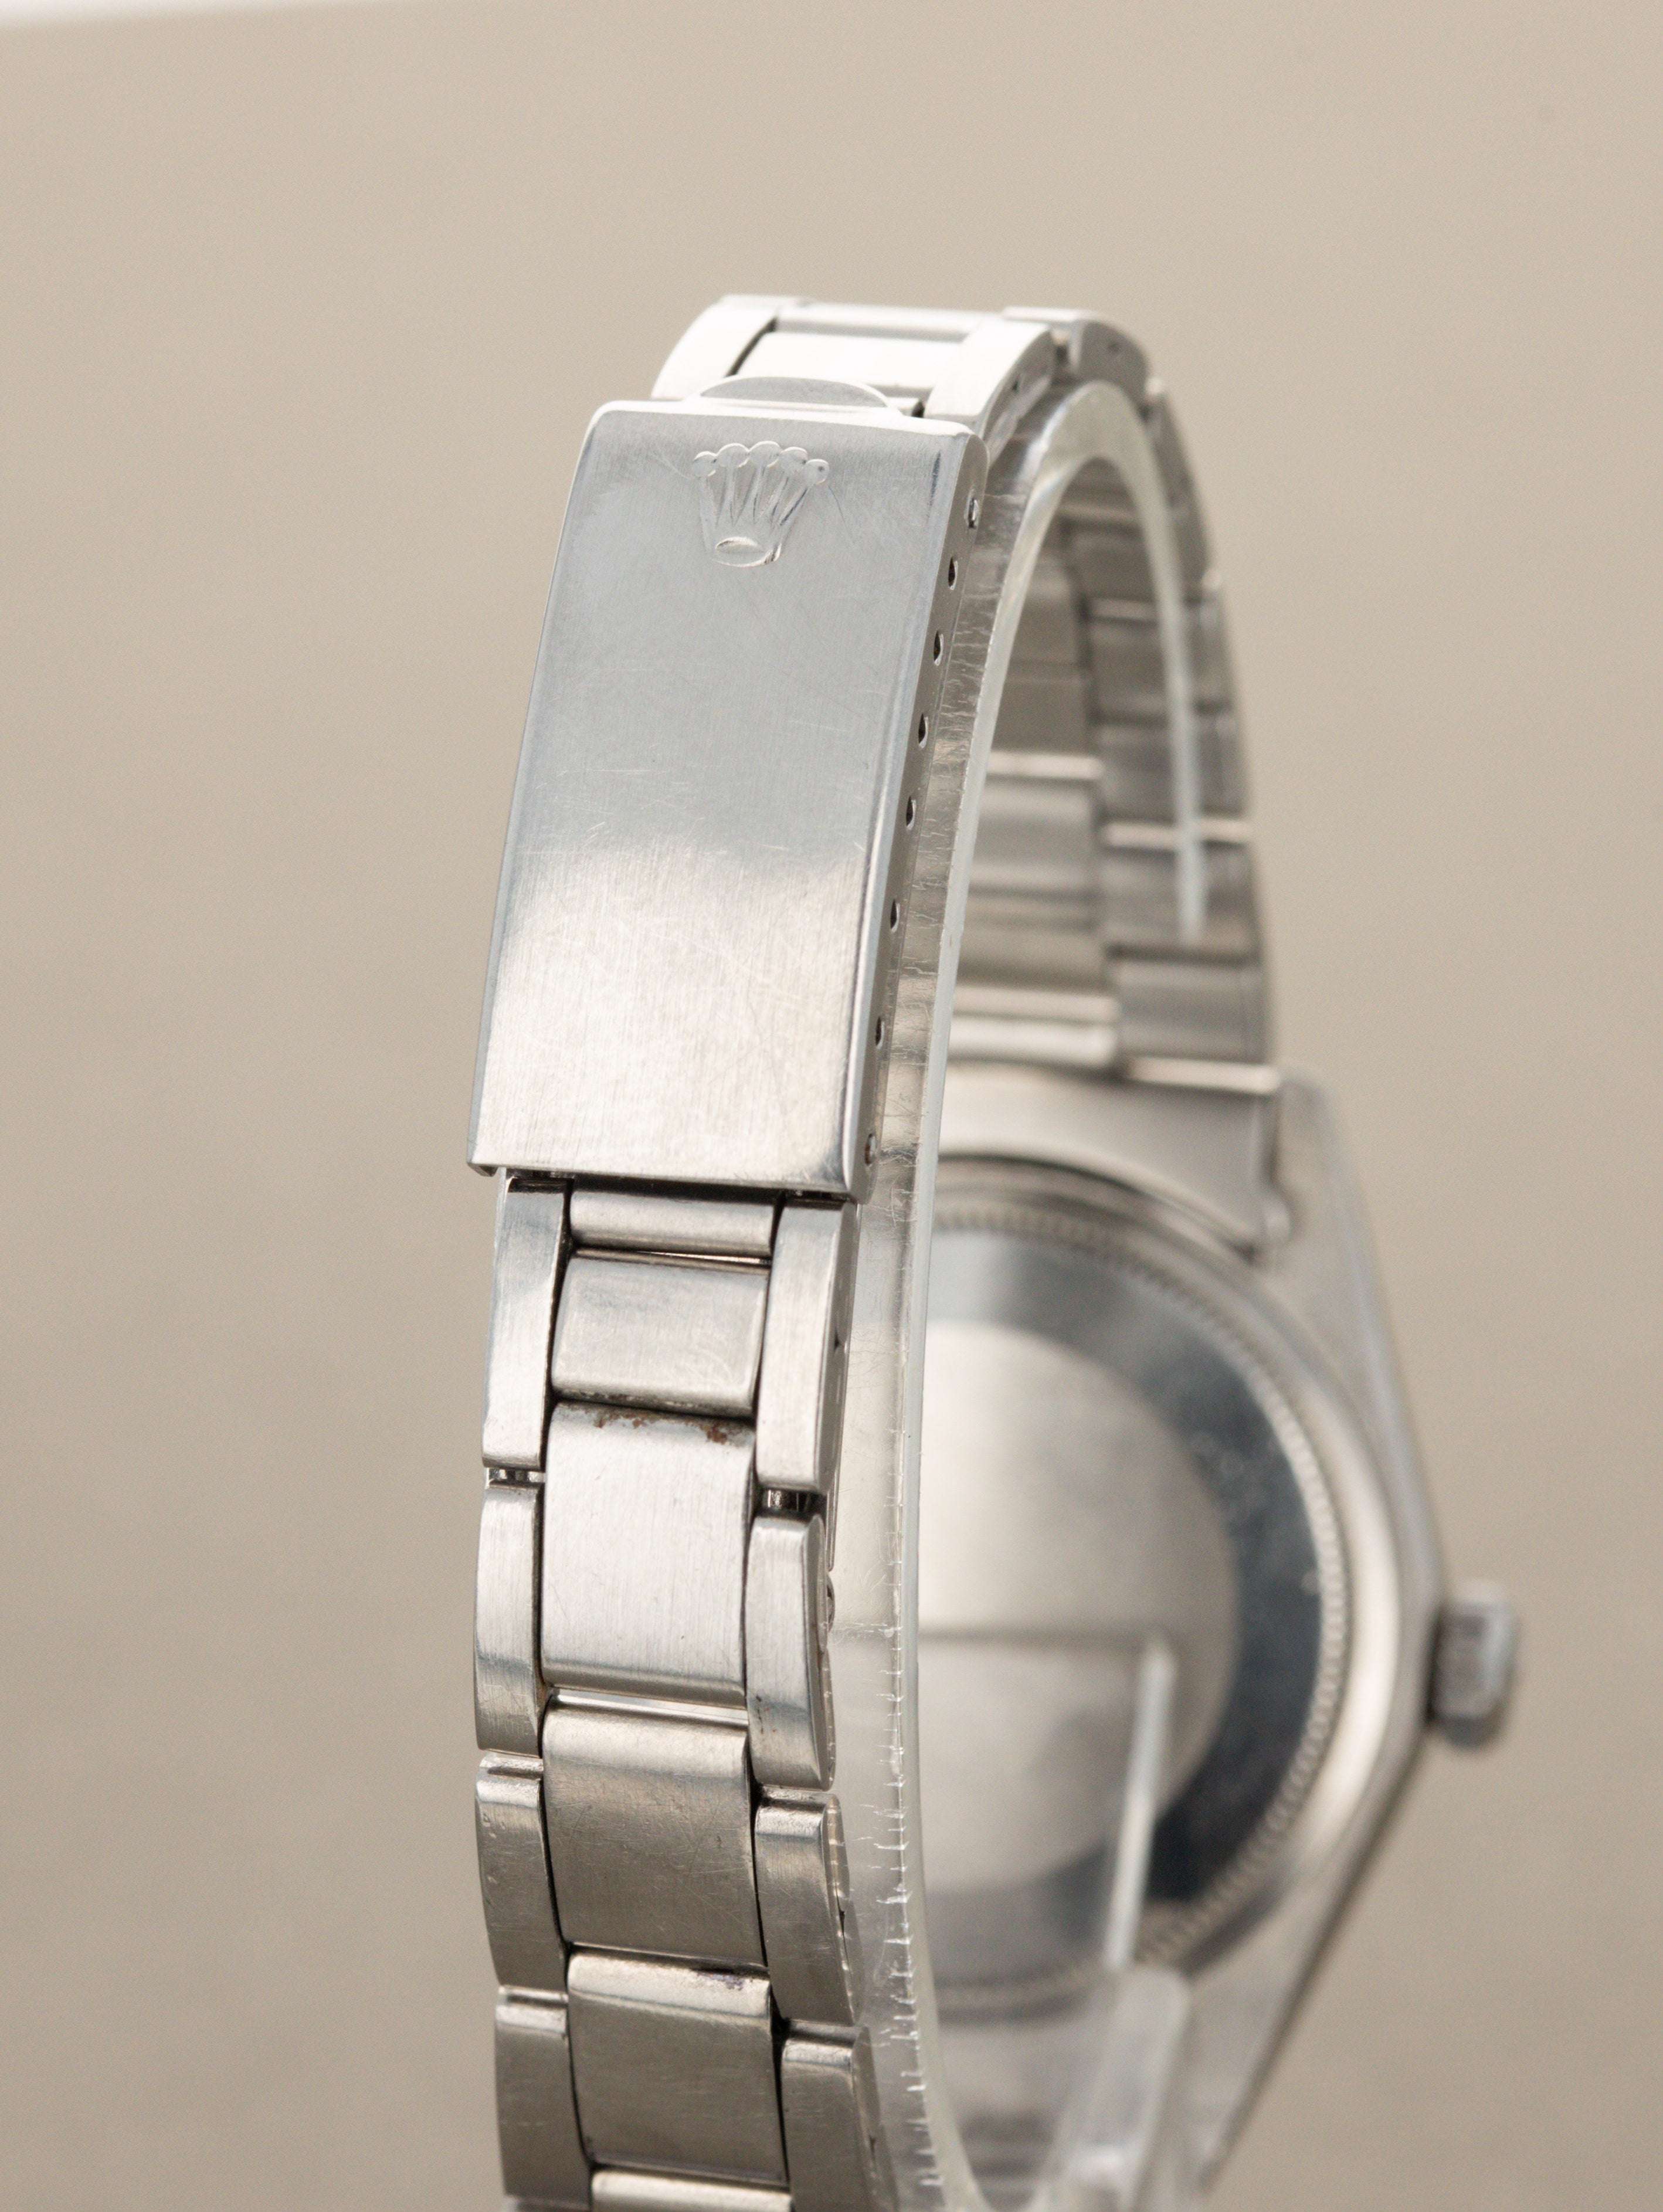 Rolex Oyster Perpetual Date Ref. 1500 - Satin Grey 'Sigma' Dial